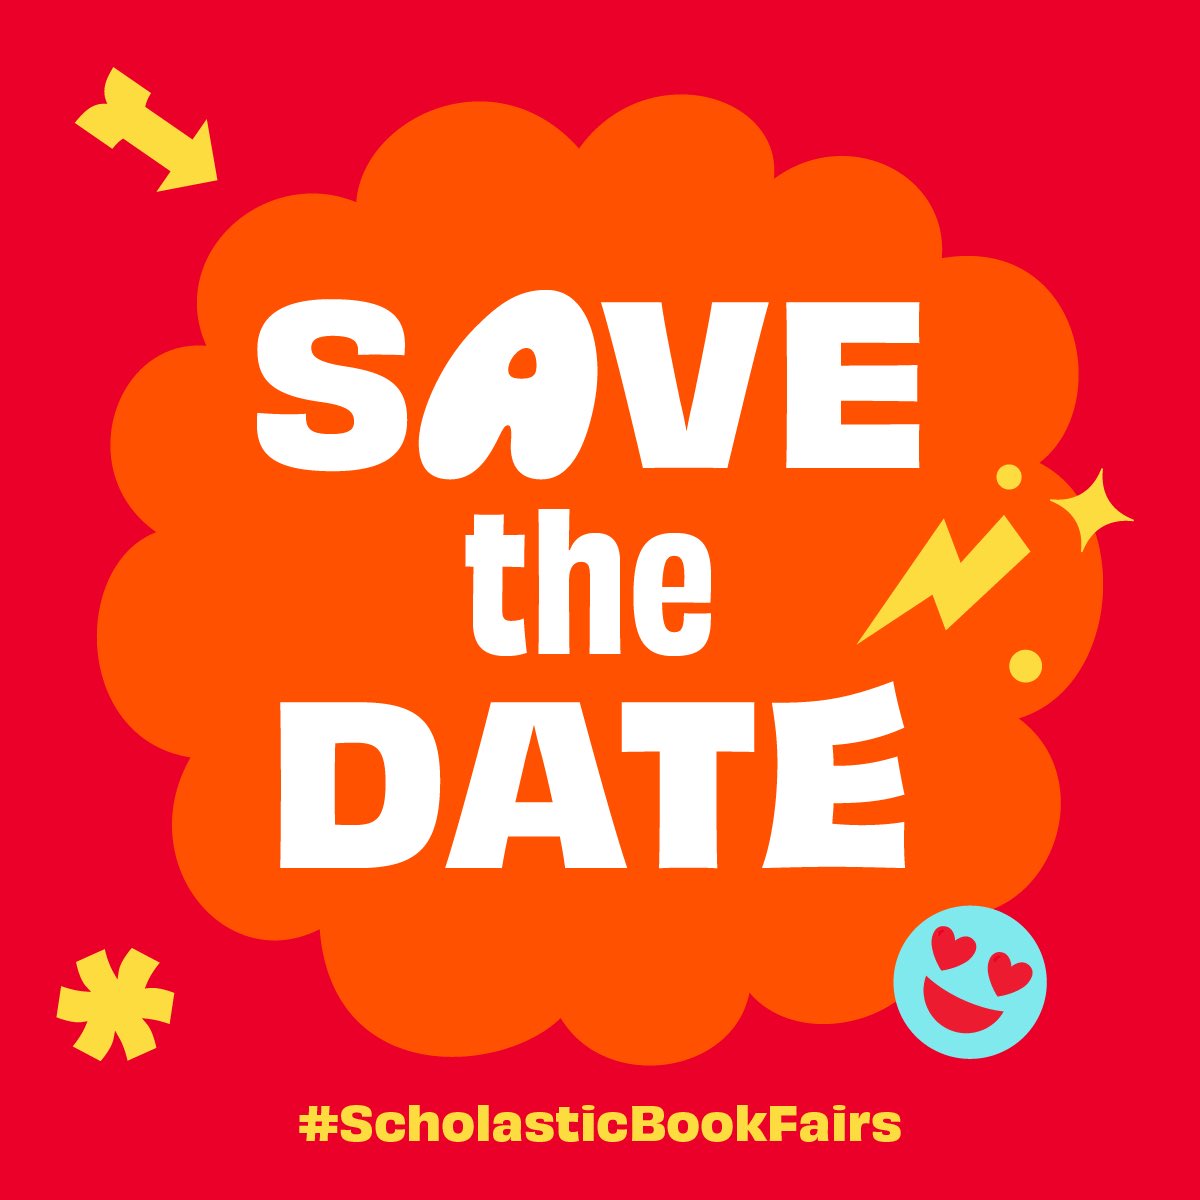 Save the date for the Fall Book Fair October 9th-13th!